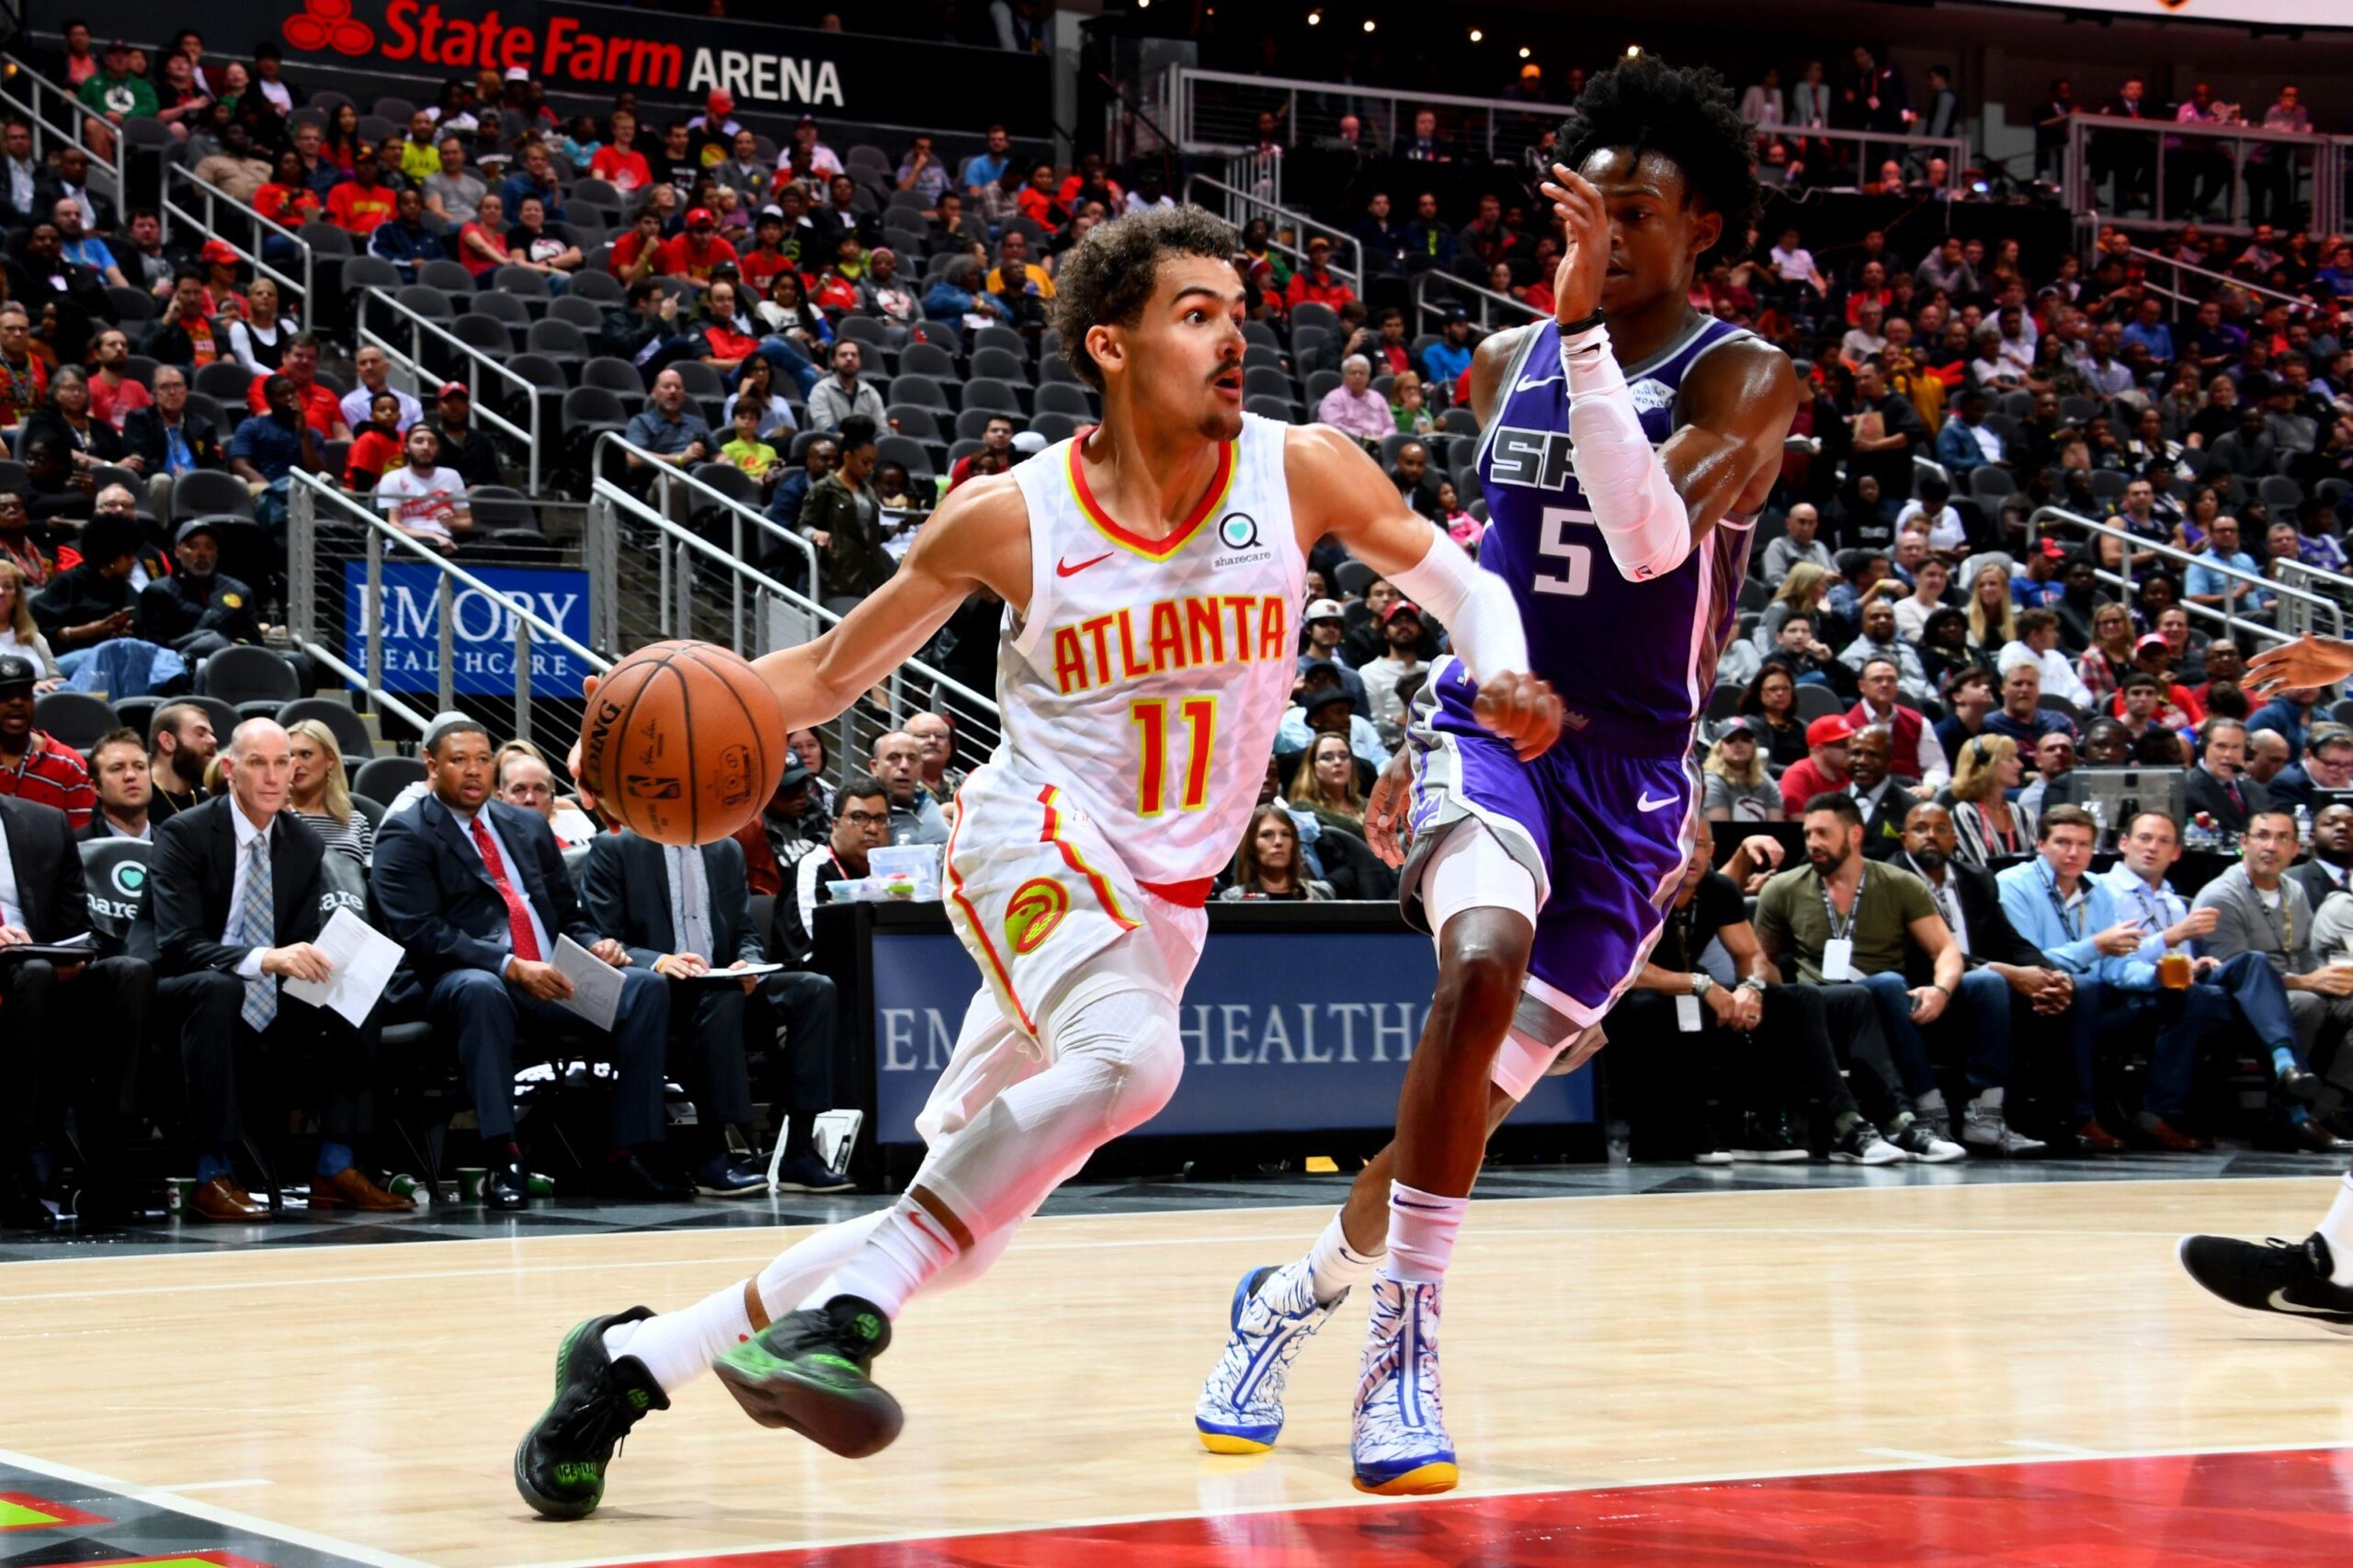 Detroit Pistons Scouting report for Trae Young, Atlanta Hawks